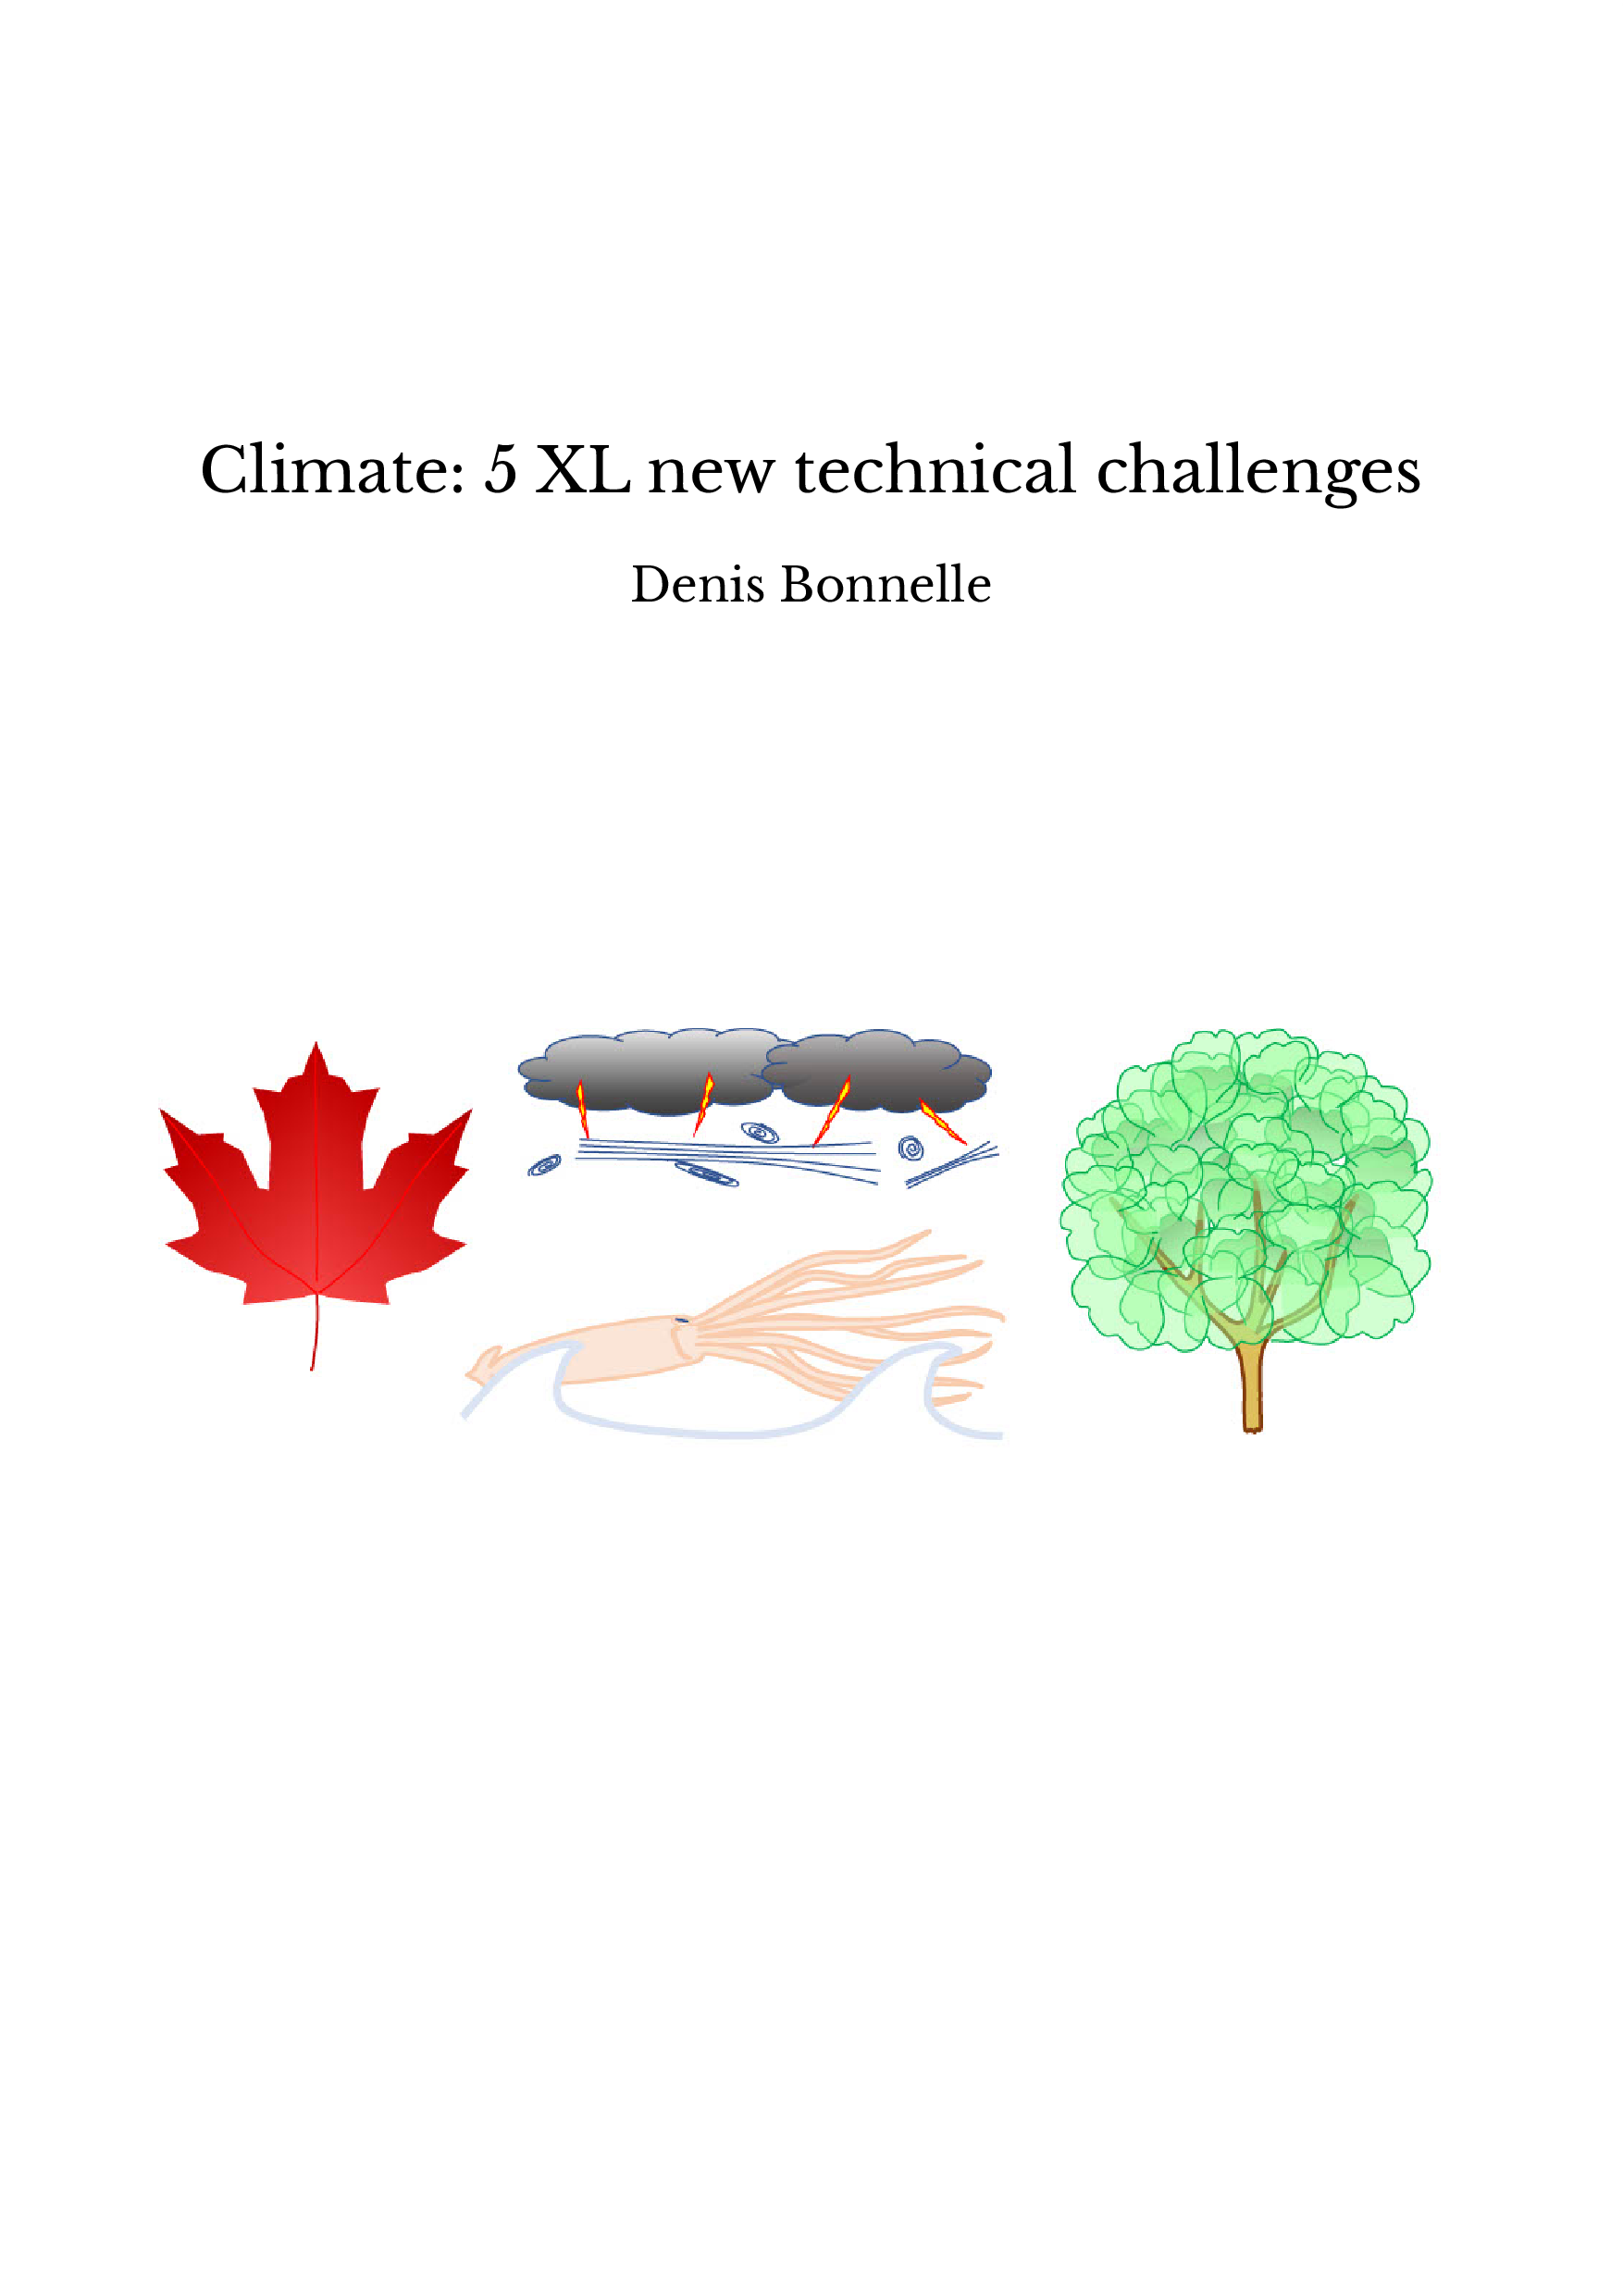 Climate: 5 XL new technical challenges